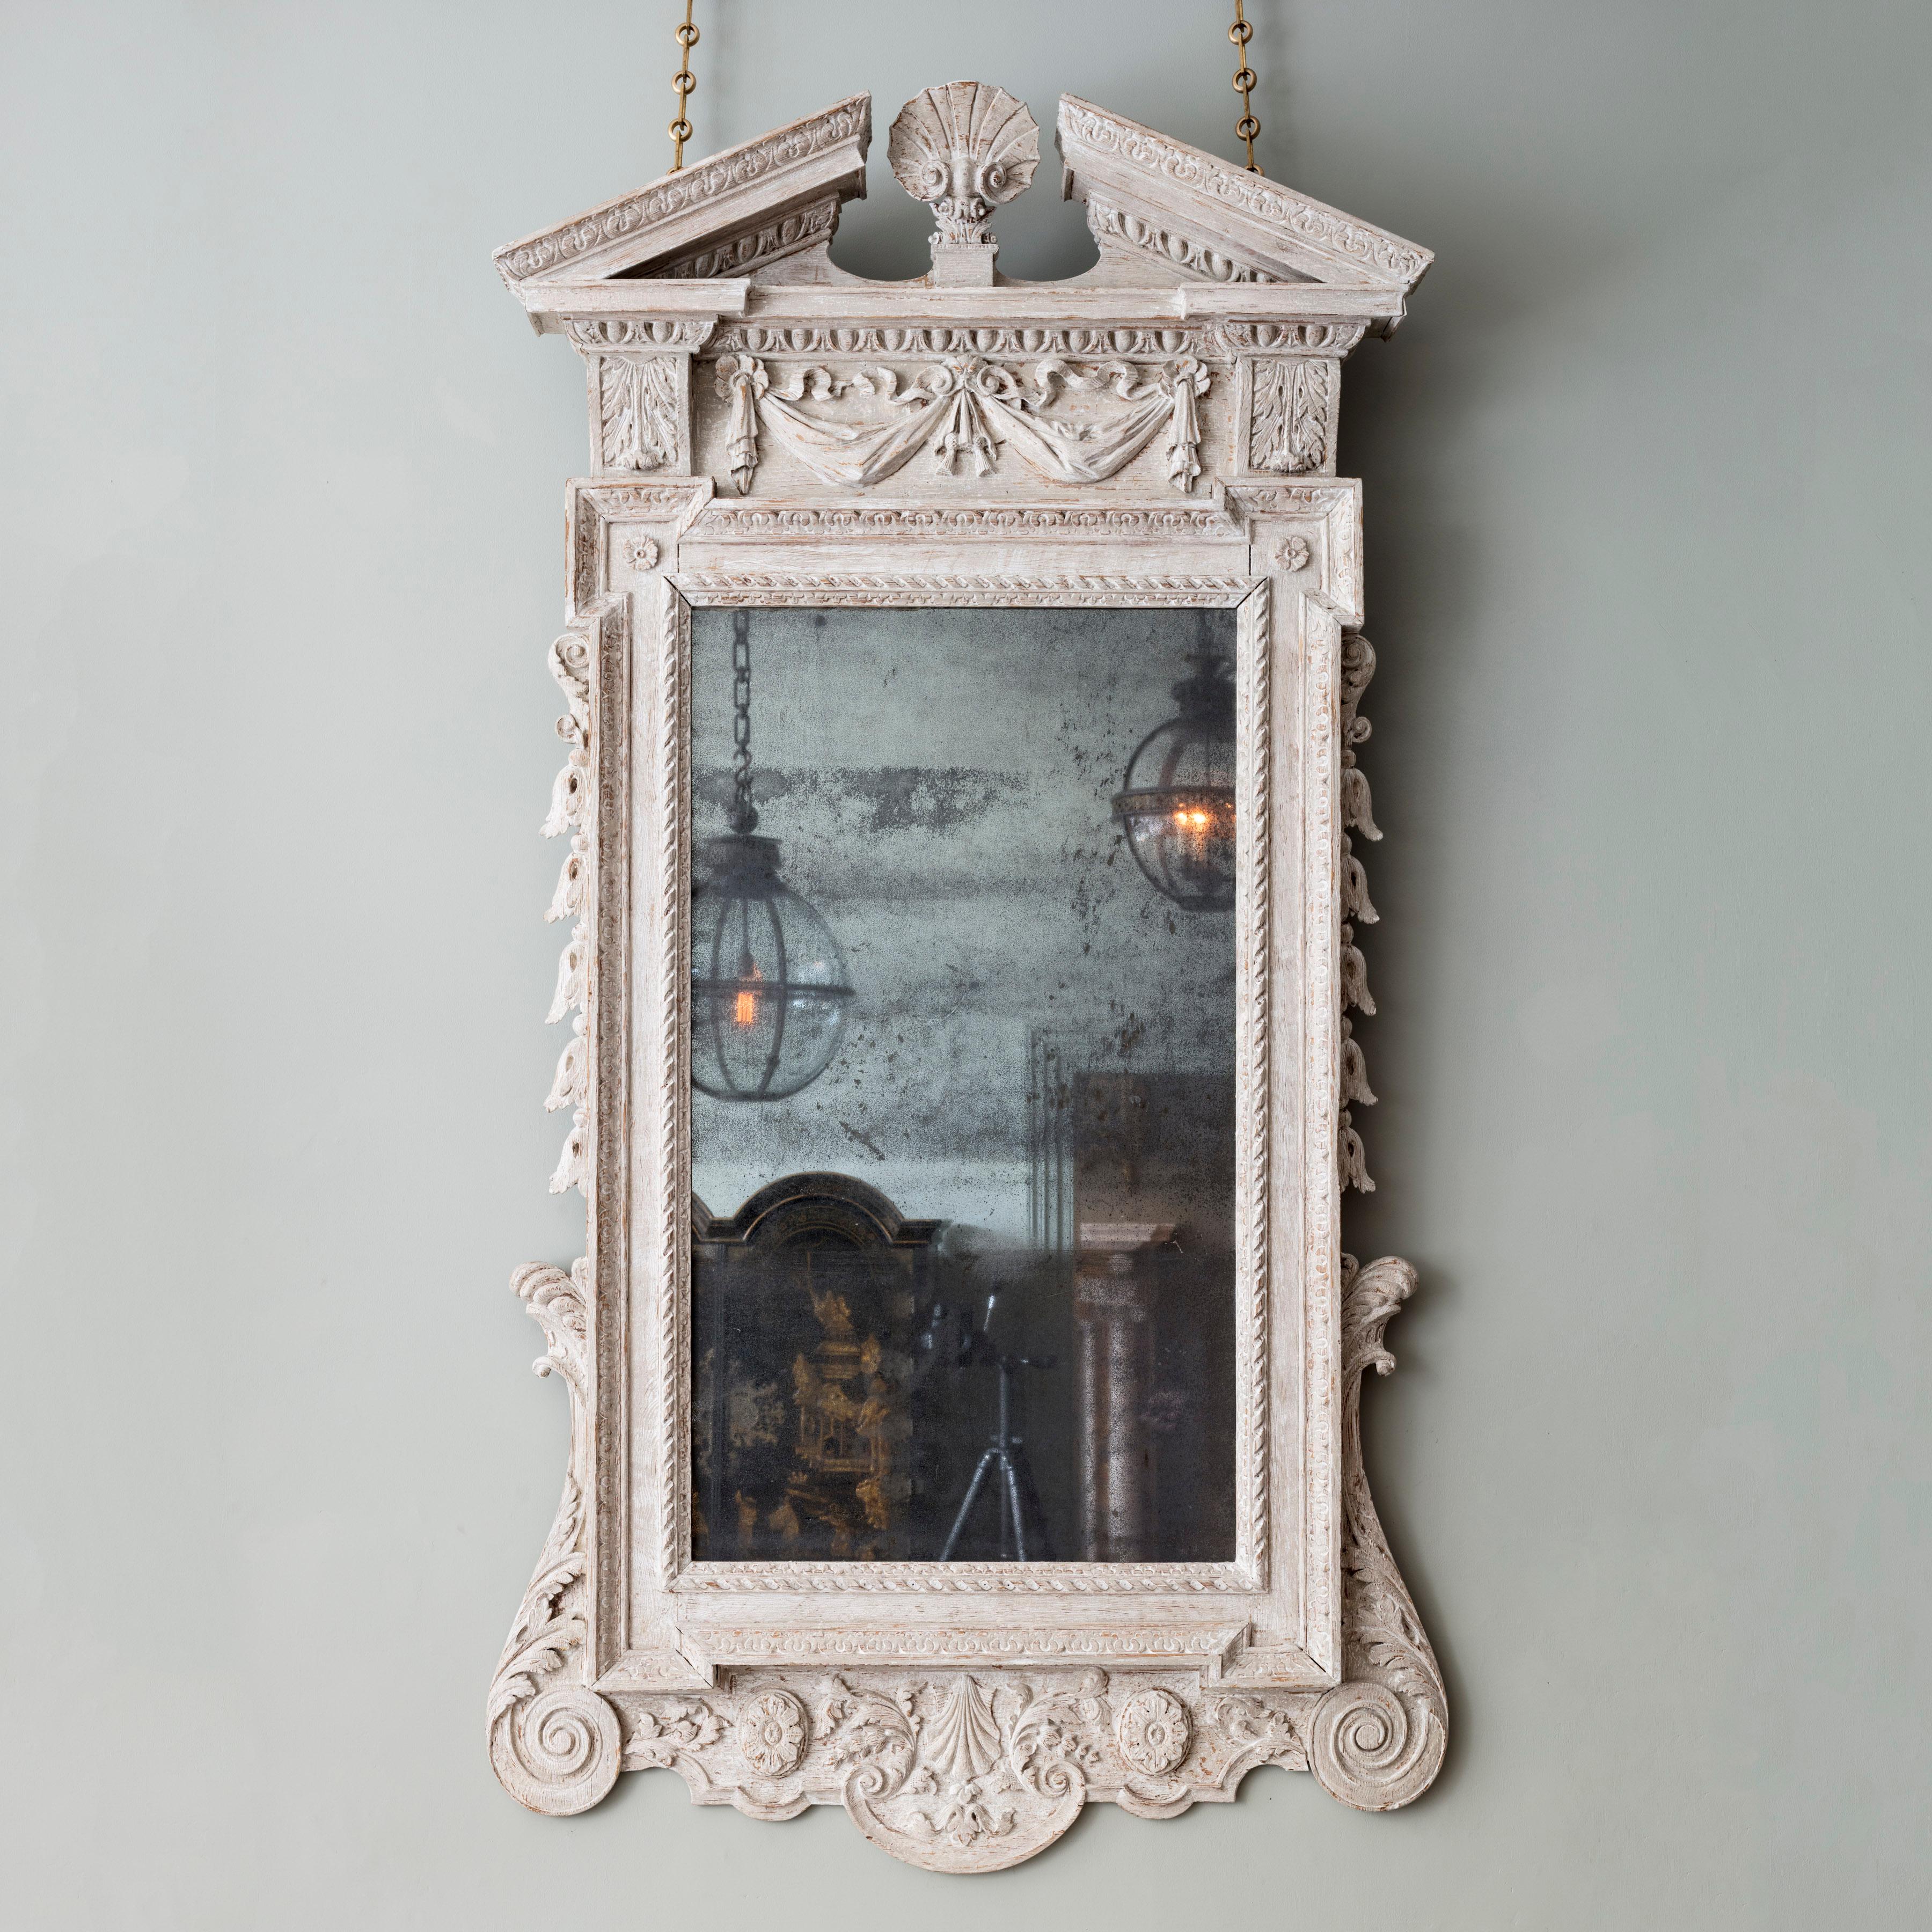 A superb Irish George II white painted mirror. The carved architectural top with a central scallop shell, above a panel of panel swagged ribbons and drapes within an egg and dart moulding, flanked by acanthus carved corbels. The long rectangular